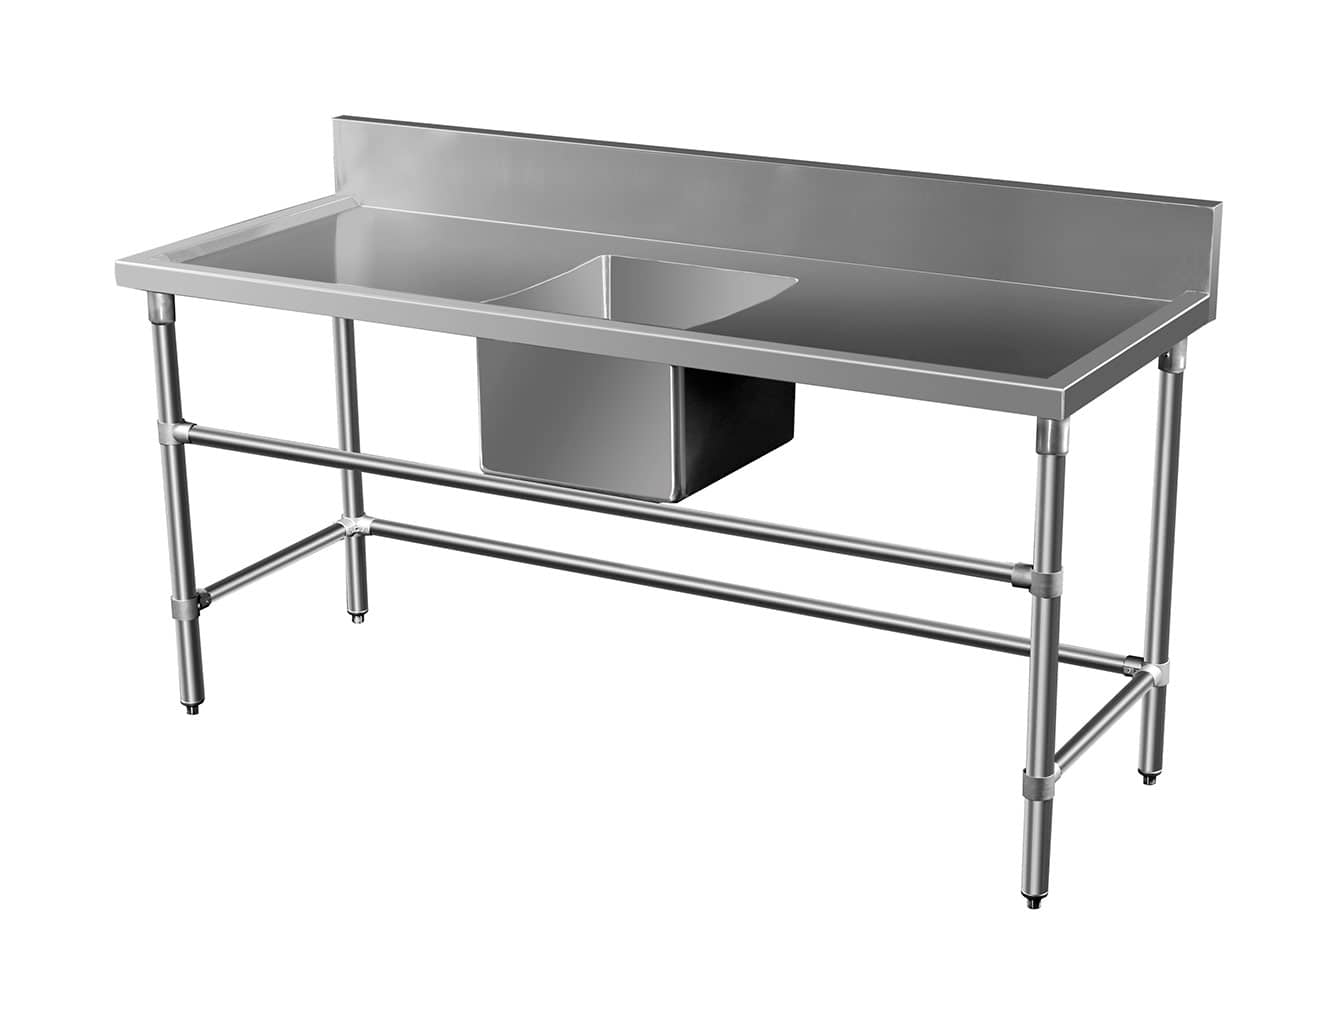 Stainless Steel Catering Sink - Right And Left Bench, 1500 x 700 x 900mm high.